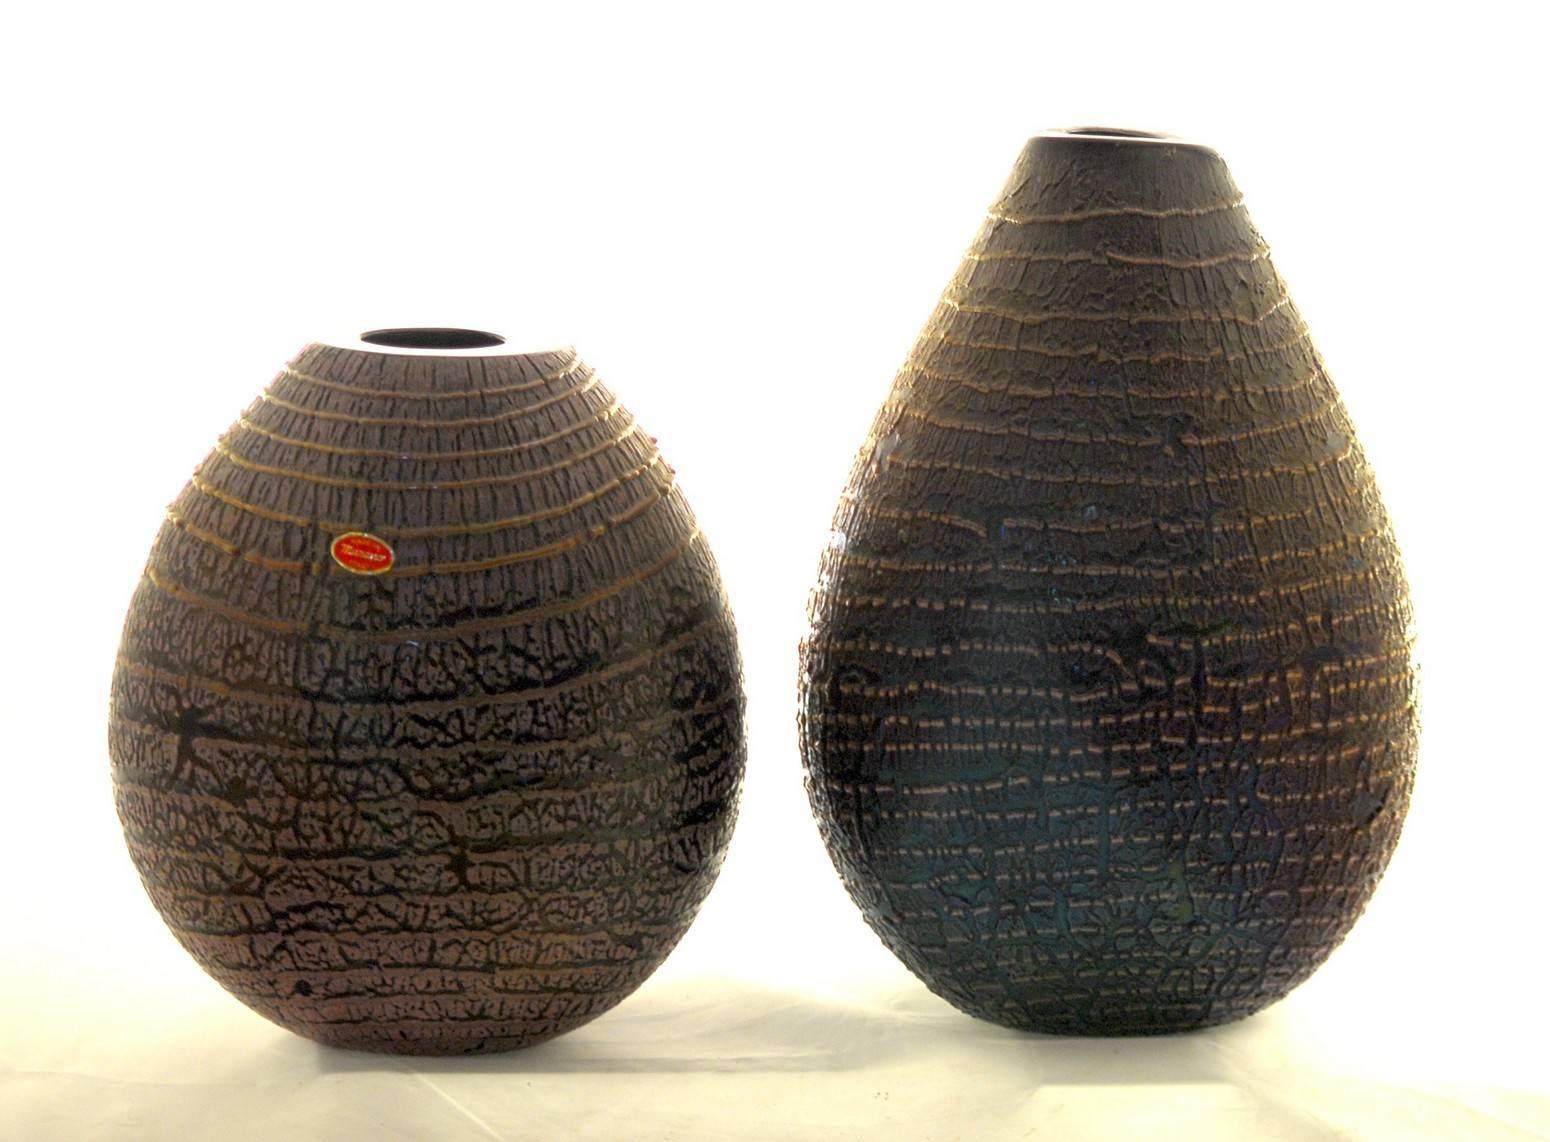 Two beautiful organic shaped crackled glass, with a spiral of avventurina to coordinate the finish into a grid. Unlevelled natural top. Deep iridescence.

These two oval vessels, made with crackled finish (ghiaccio) but striped with avventurina so